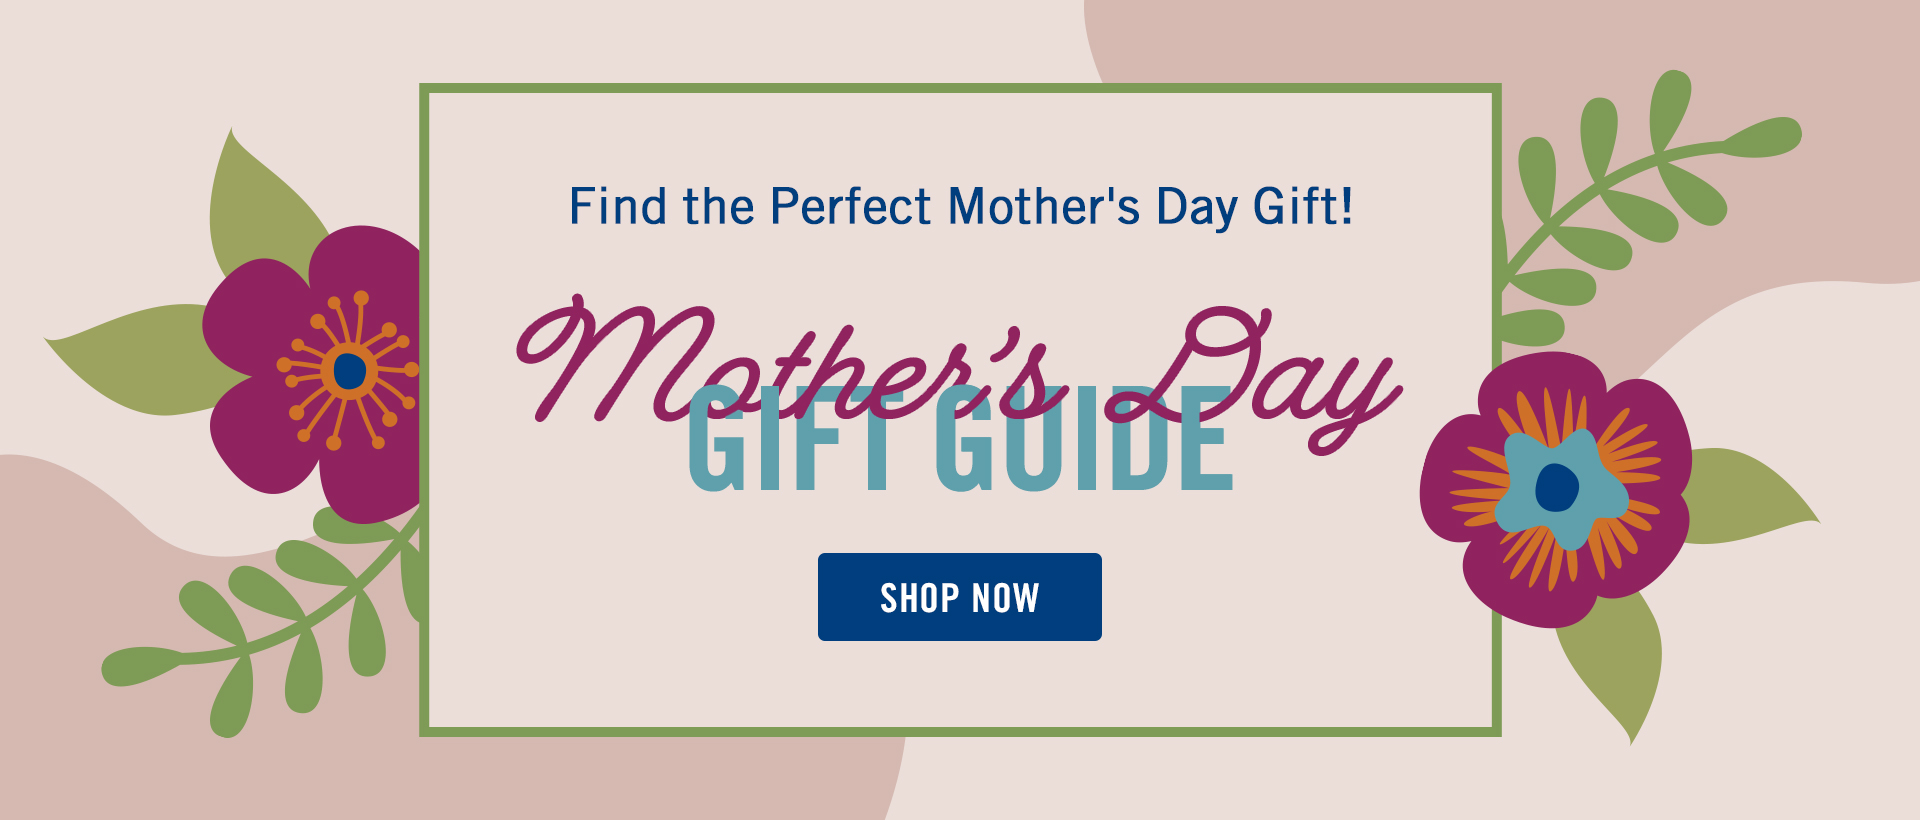 WHS online store banner promoting "Mother's Day" collection. Two purple flowers, green foliage, and "Shop Now" button. 